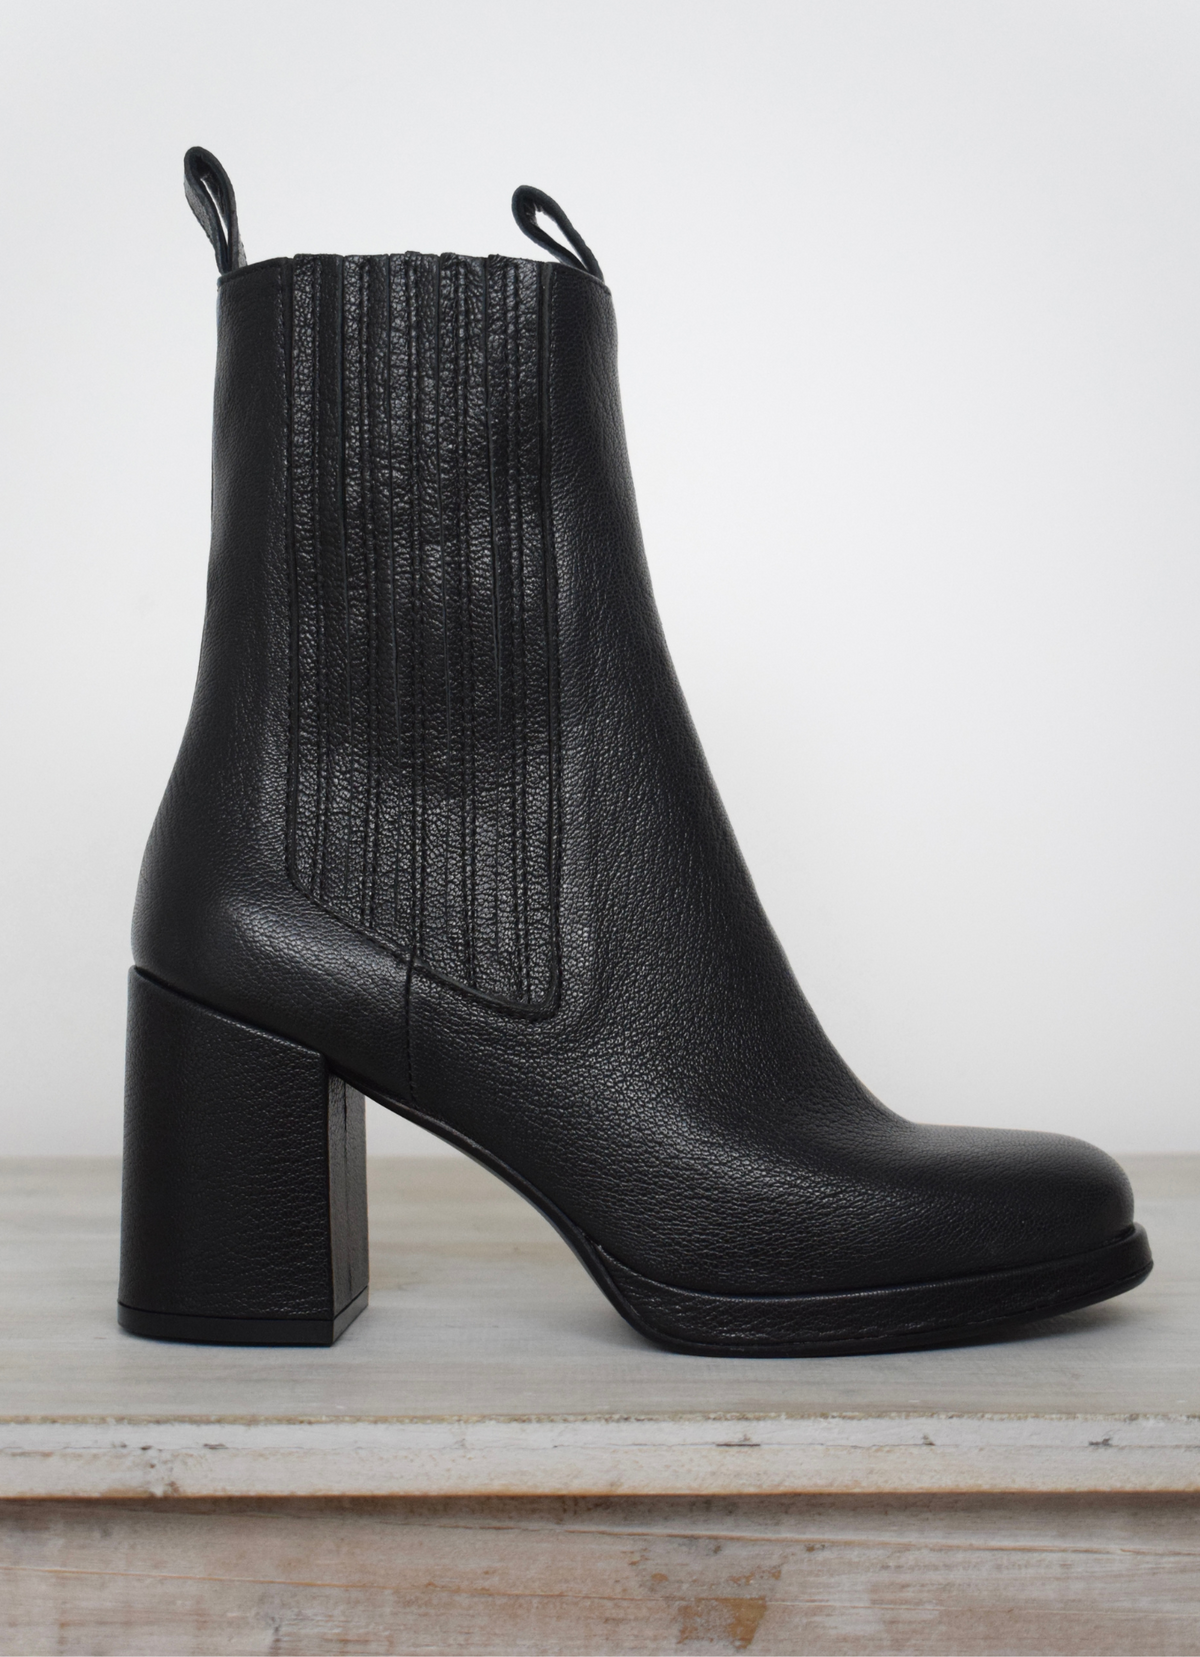 Black heeled boot with small platform 